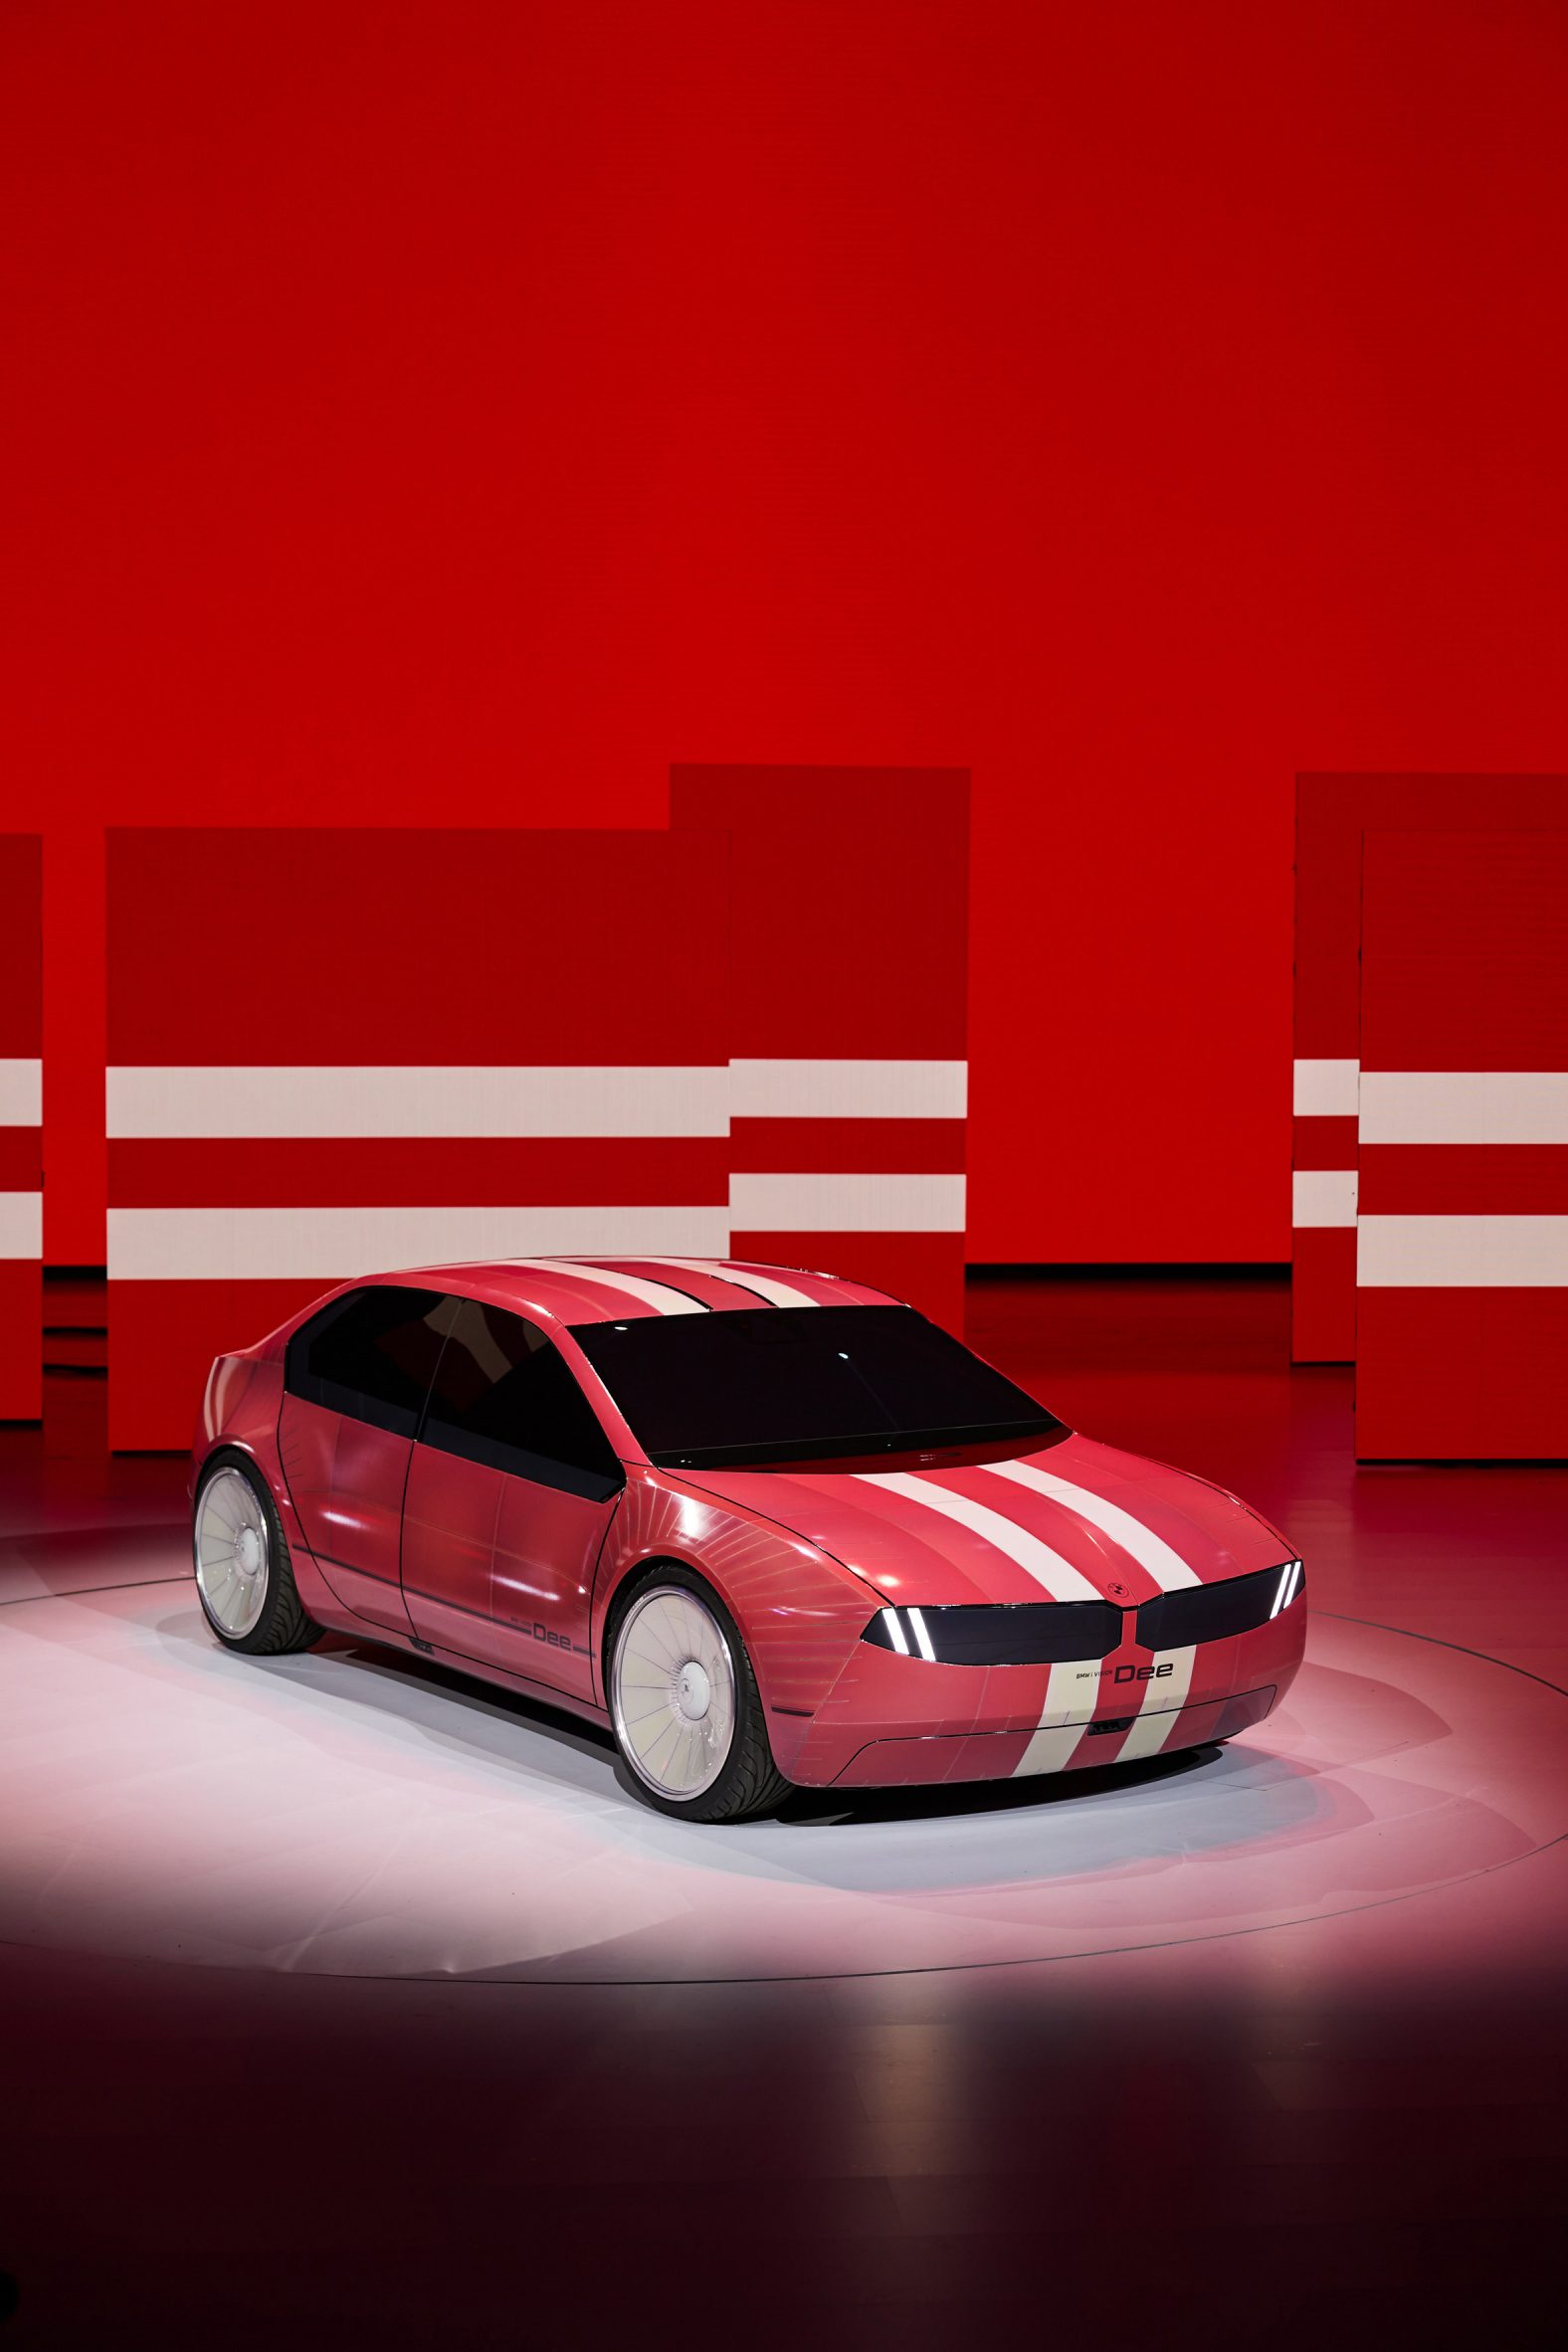 Red colour chaning car with white stripes